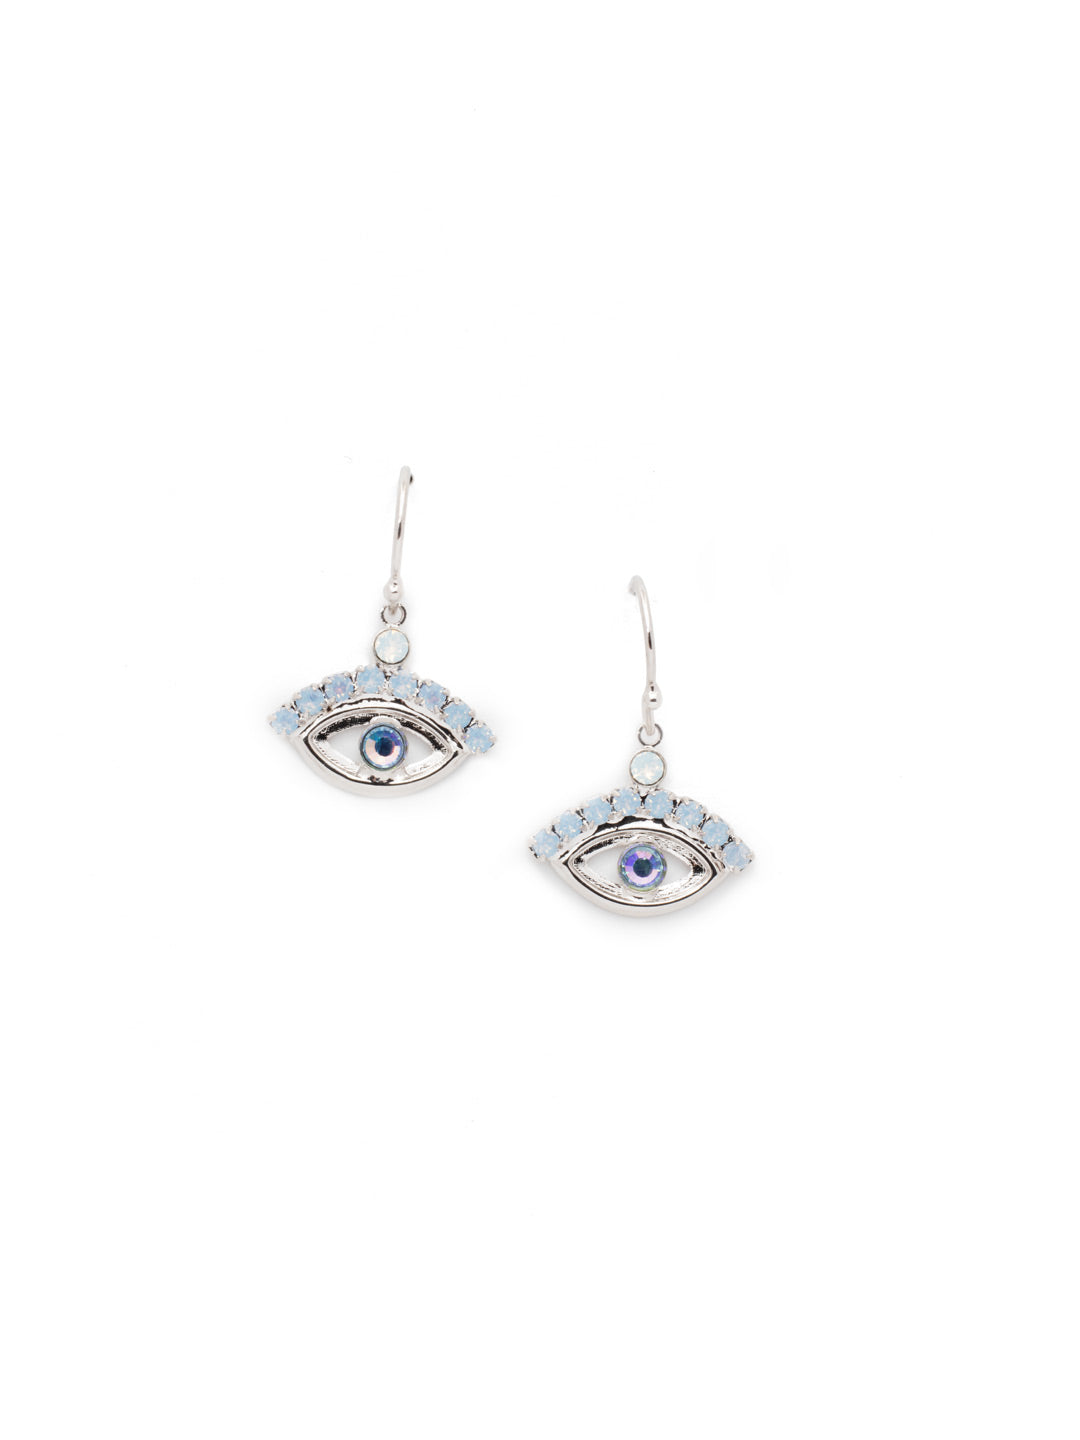 Mini Evil Eye Dangle Earrings - EEV6PDWNB - <p>Quirky meets sparkly in our Mini Evil Eye Dangle Earrings. The Evil Eye symbol is offset by sparkling round crystals. From Sorrelli's Windsor Blue collection in our Palladium finish.</p>